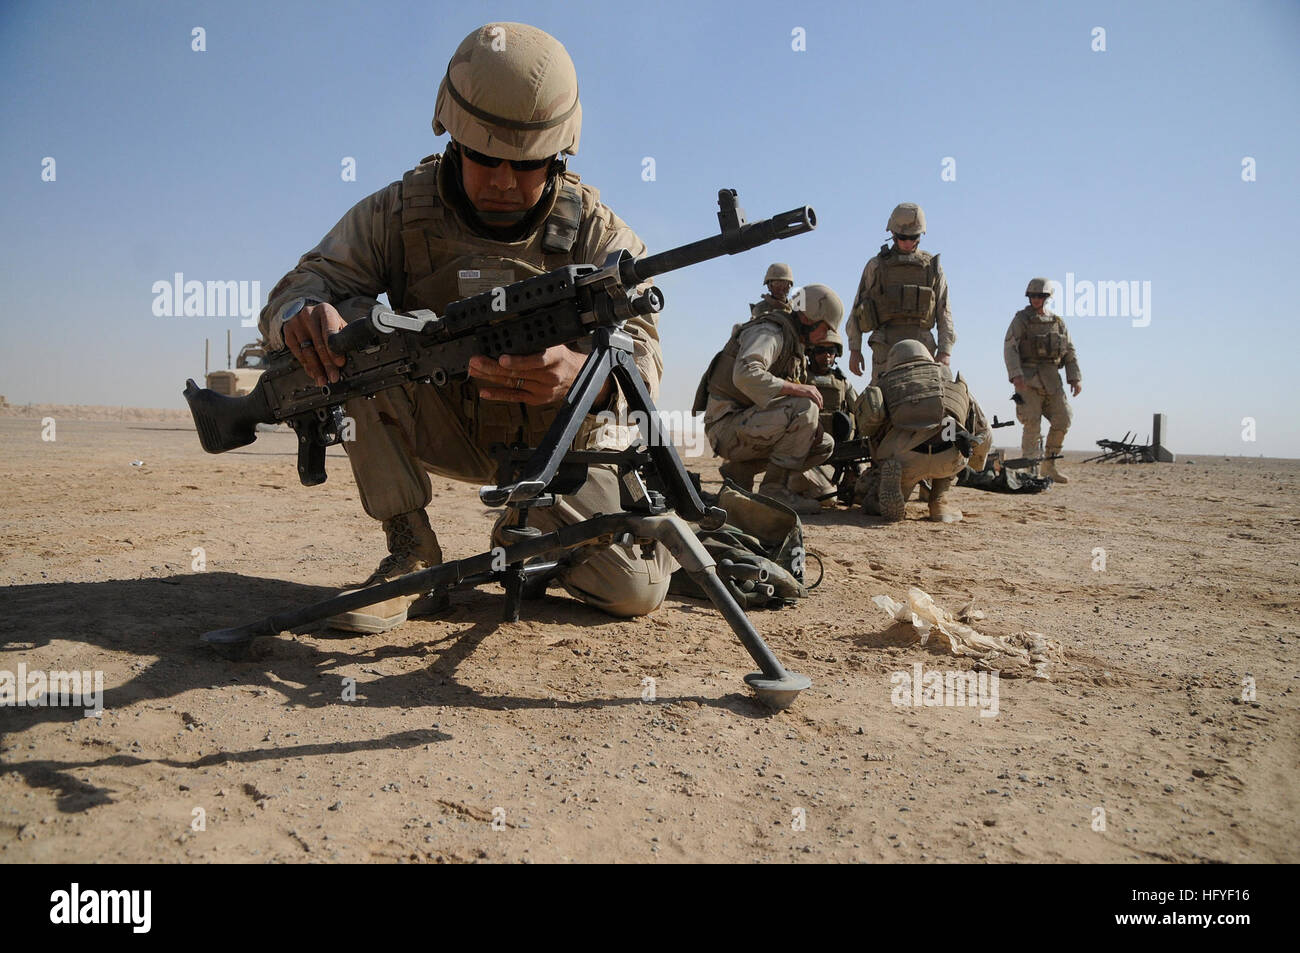 101016-N-0475R-098 HELMAND PROVINCE, Afghanistan (Oct. 16, 2010) Construction Electrician 2nd Class Daniel Garcia, left, sets up an M60 machine gun as other Seabees assigned to Naval Mobile Construction Battalion (NMCB) 5 set up their weapons during crew served weapons qualifications at Camp Leatherneck, Afghanistan. NMCB-5 is deployed to Afghanistan executing general engineering, infrastructure construction and project management in support of Operation Enduring Freedom. (U.S. Navy photo by Mass Communication Specialist 2nd Class Ace Rheaume/Released) US Navy 101016-N-0475R-098 Construction E Stock Photo